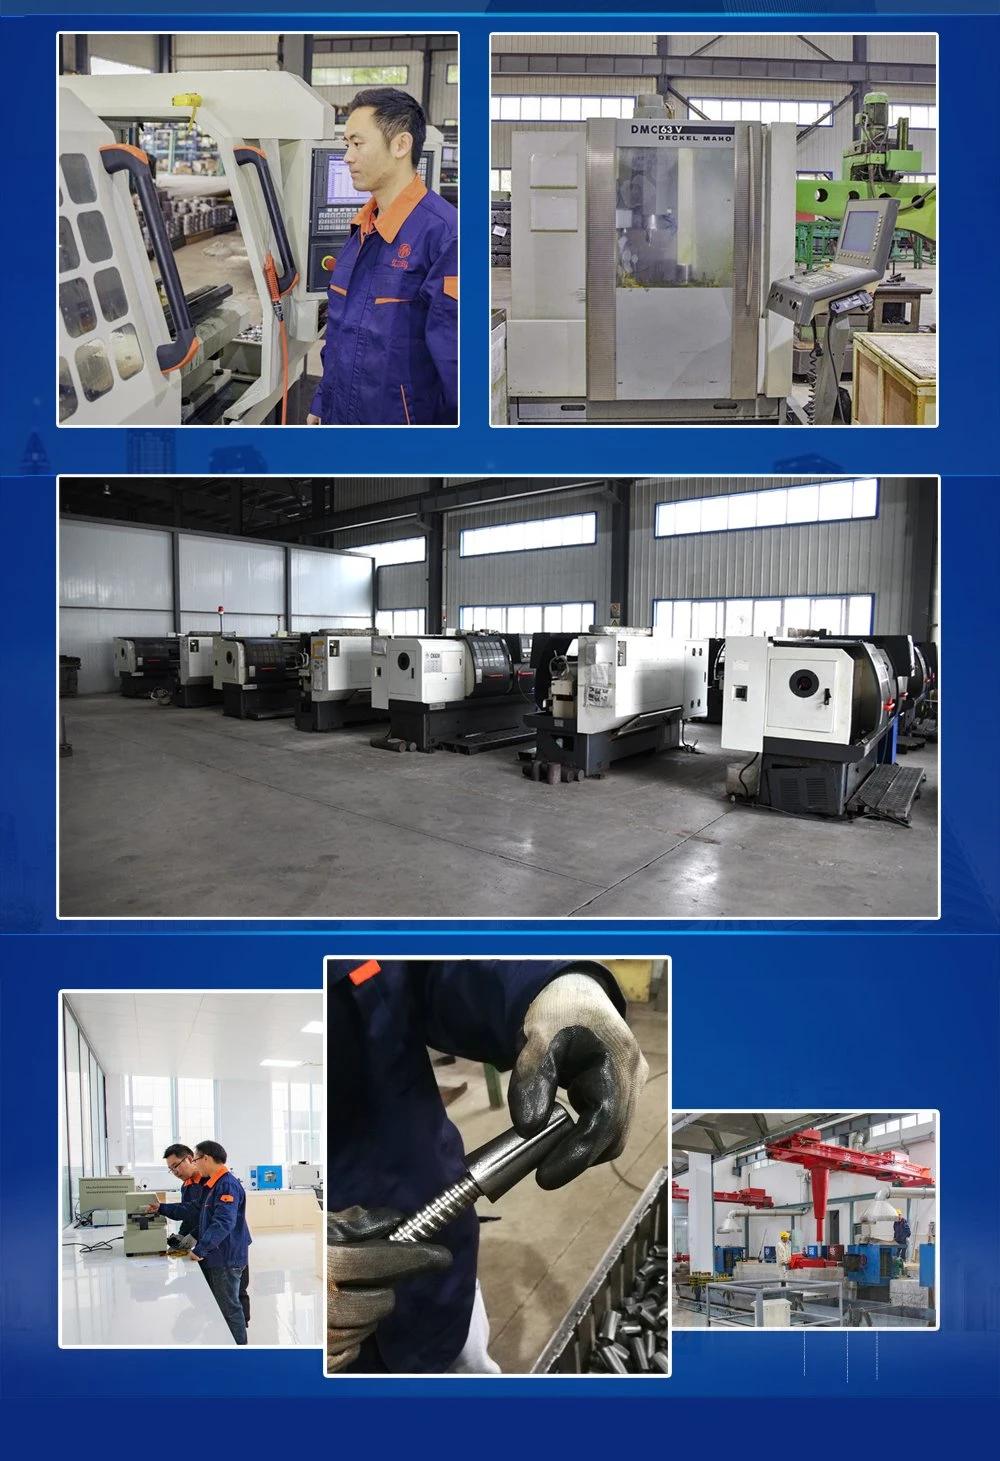 Casting, Forging, Pressing, Compressing, Decoration, Lighting, Hydraulic, Pressure, Equipment, Substation, Wire System, Power Fitting, Mating Facility, Train